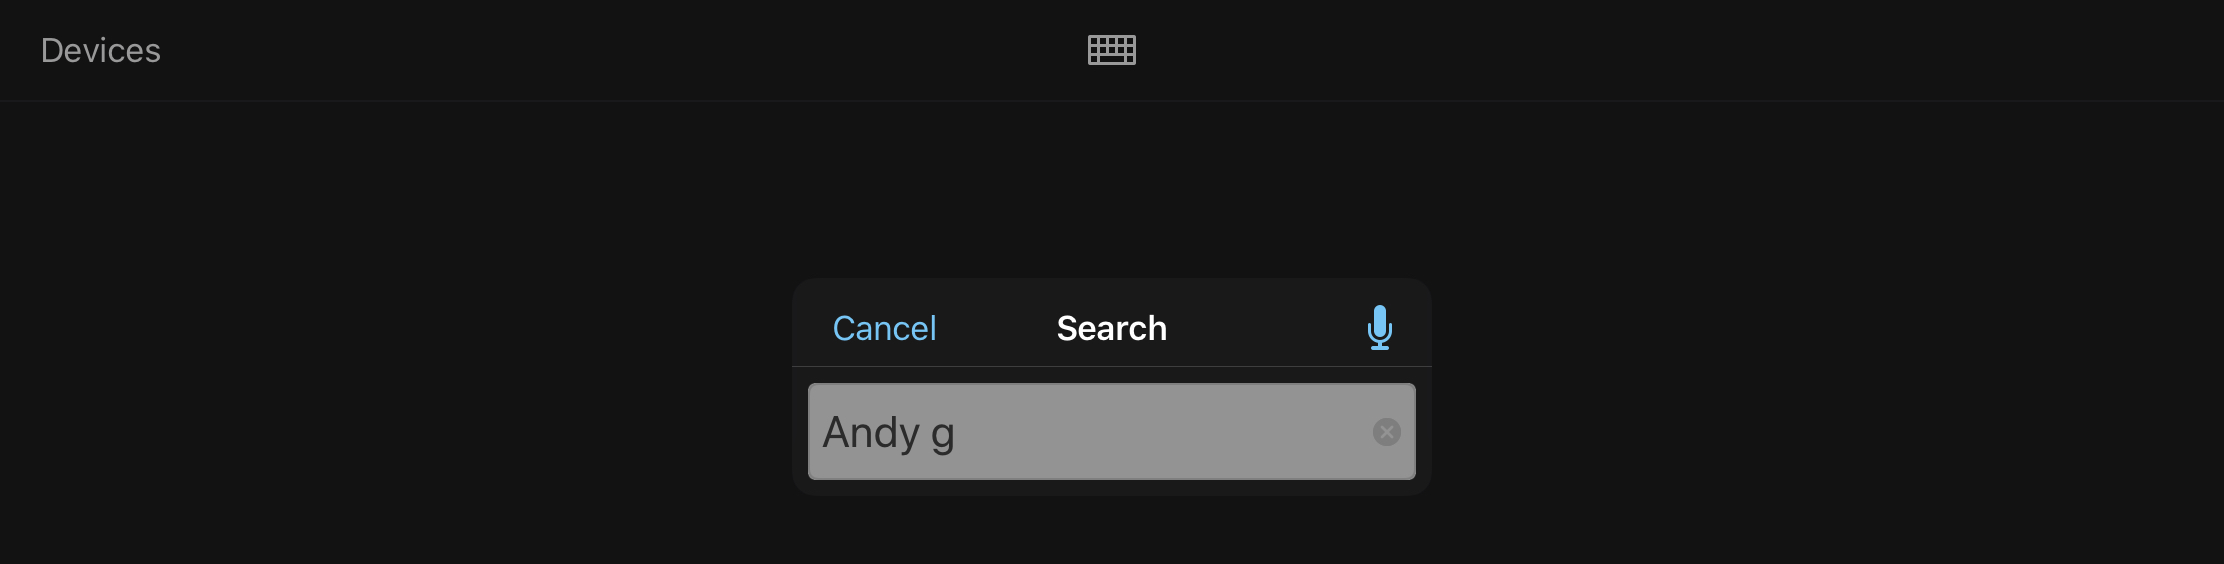 Figure 17: Once you’ve added your Apple TV to the Remote app’s device list (left), the app lets you navigate the Apple TV’s interface and control media playback from your wrist (center, right).